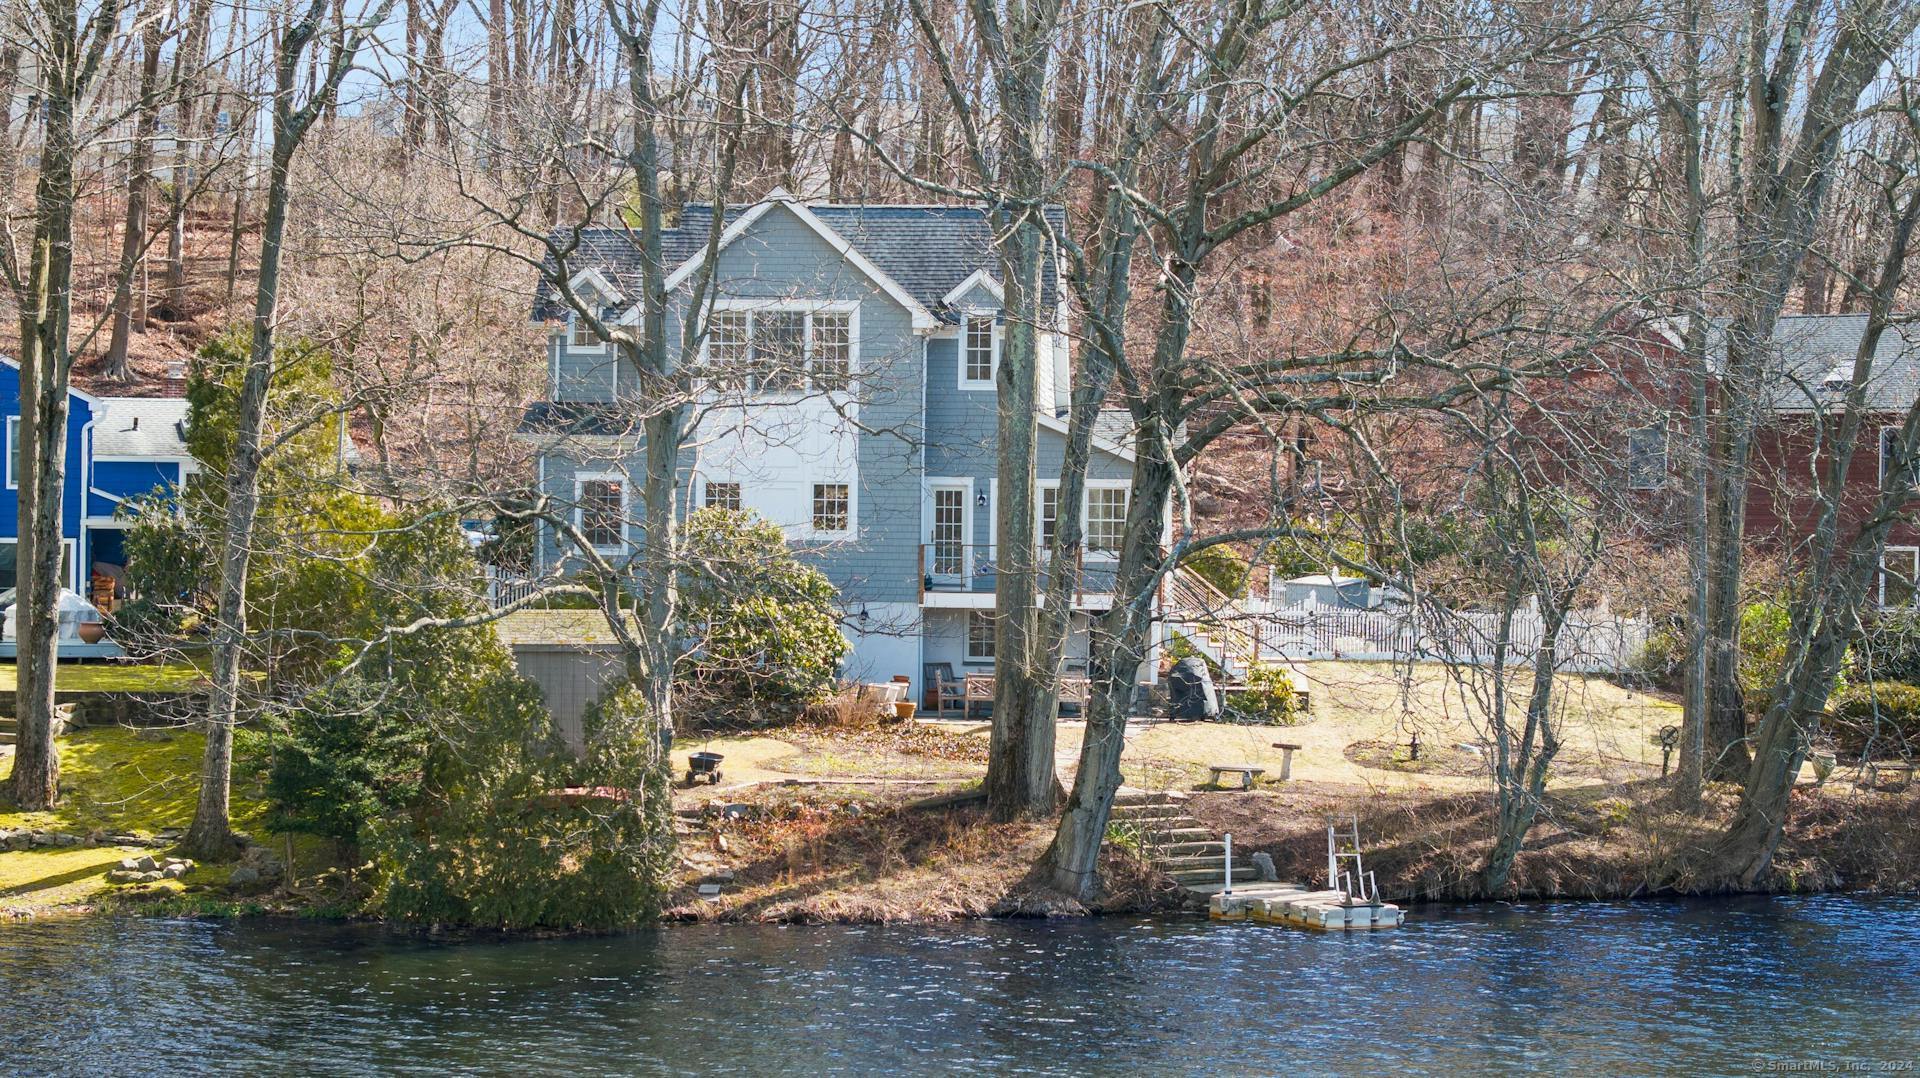 38 Cary Road, Greenwich, CT 06878